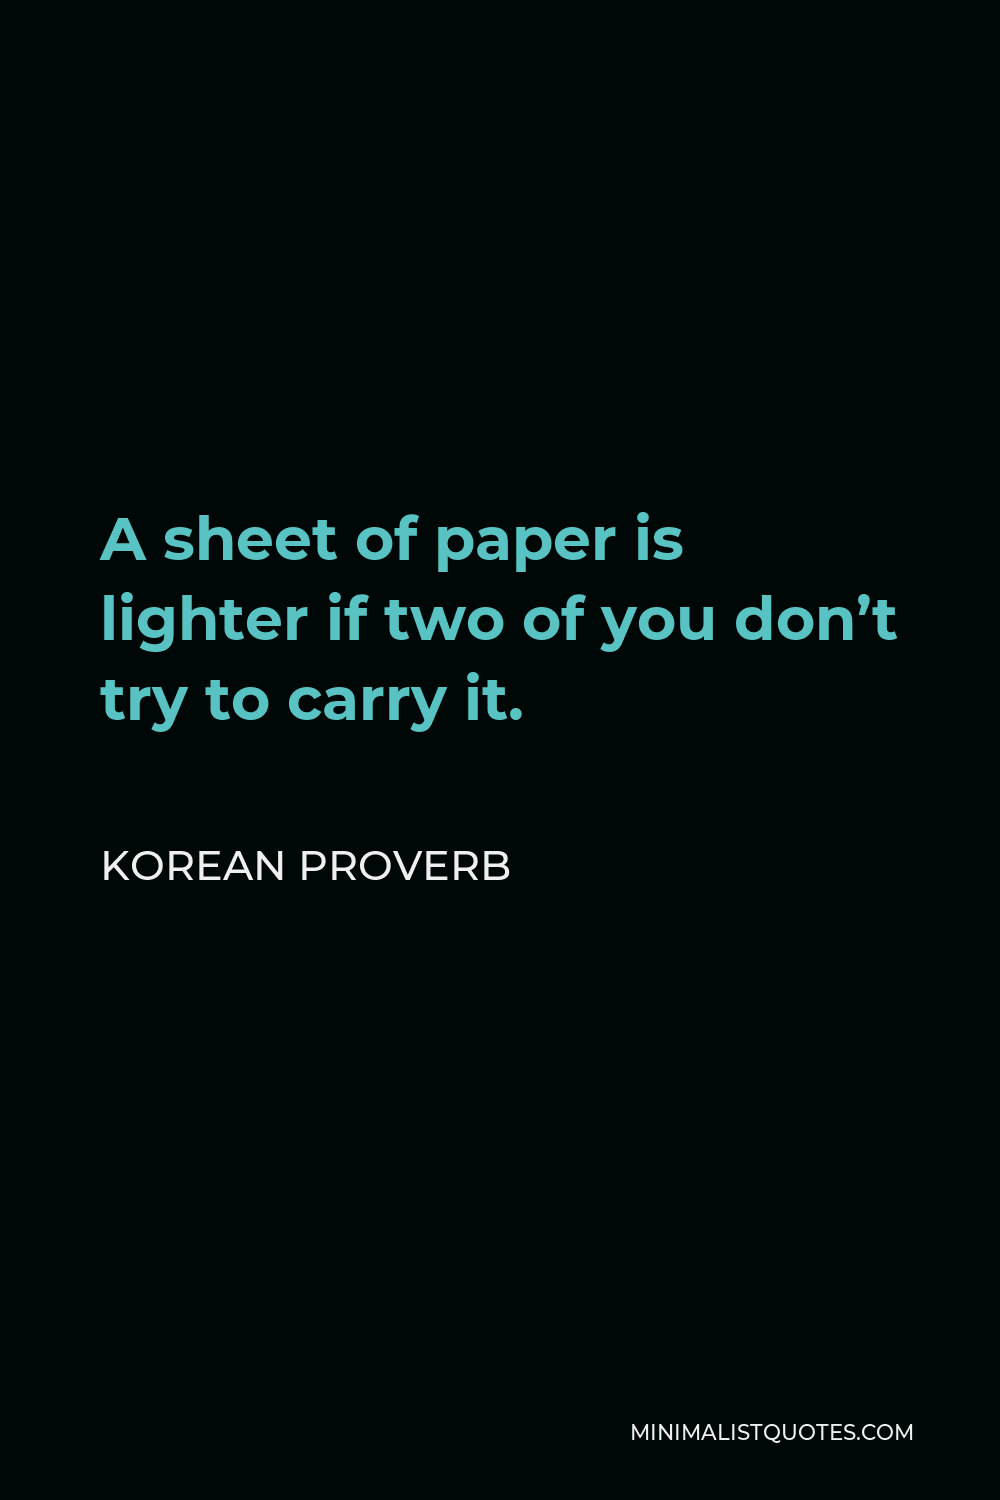 Korean Proverb Quote - A sheet of paper is lighter if two of you don’t try to carry it.